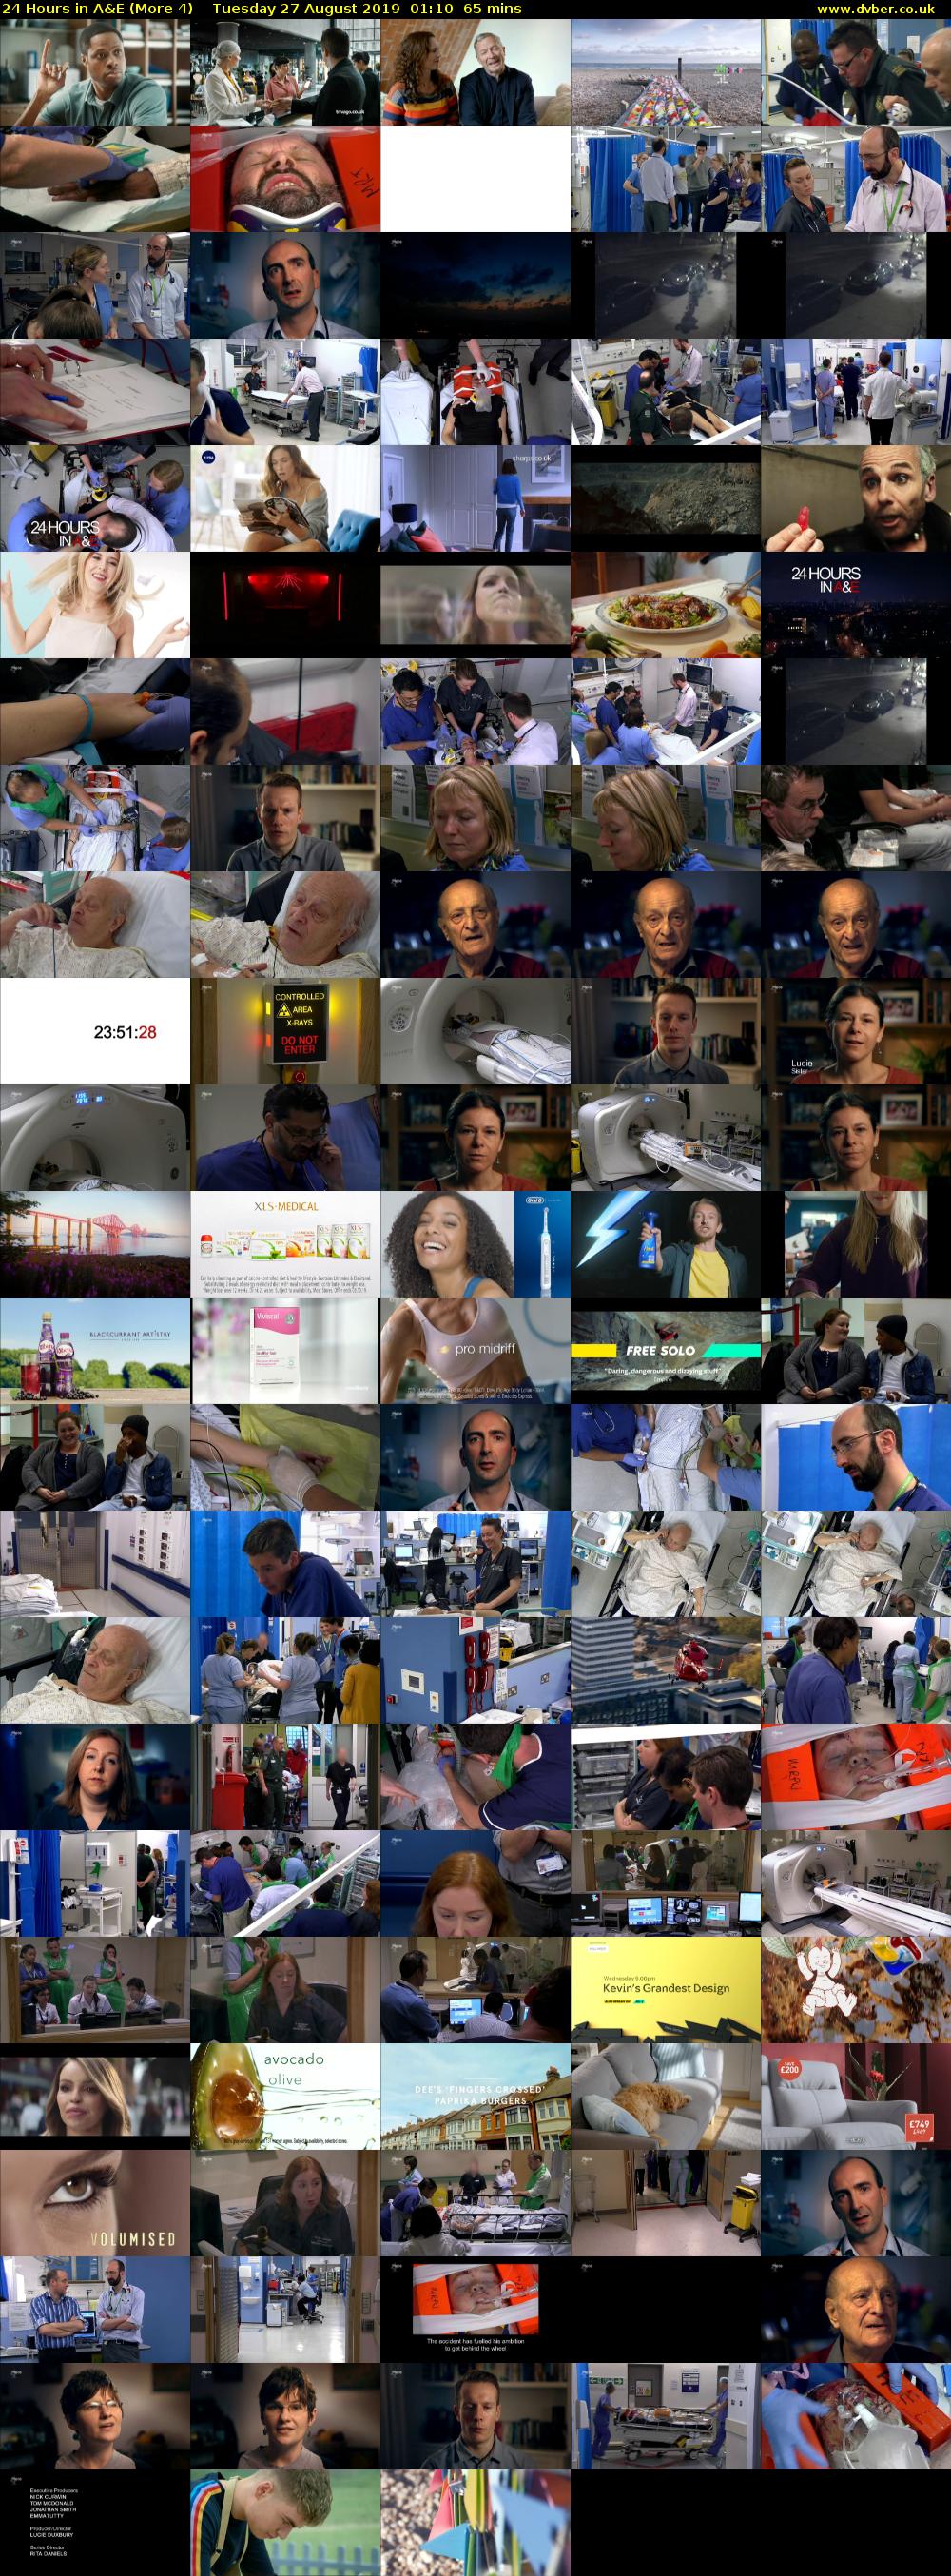 24 Hours in A&E (More 4) Tuesday 27 August 2019 01:10 - 02:15